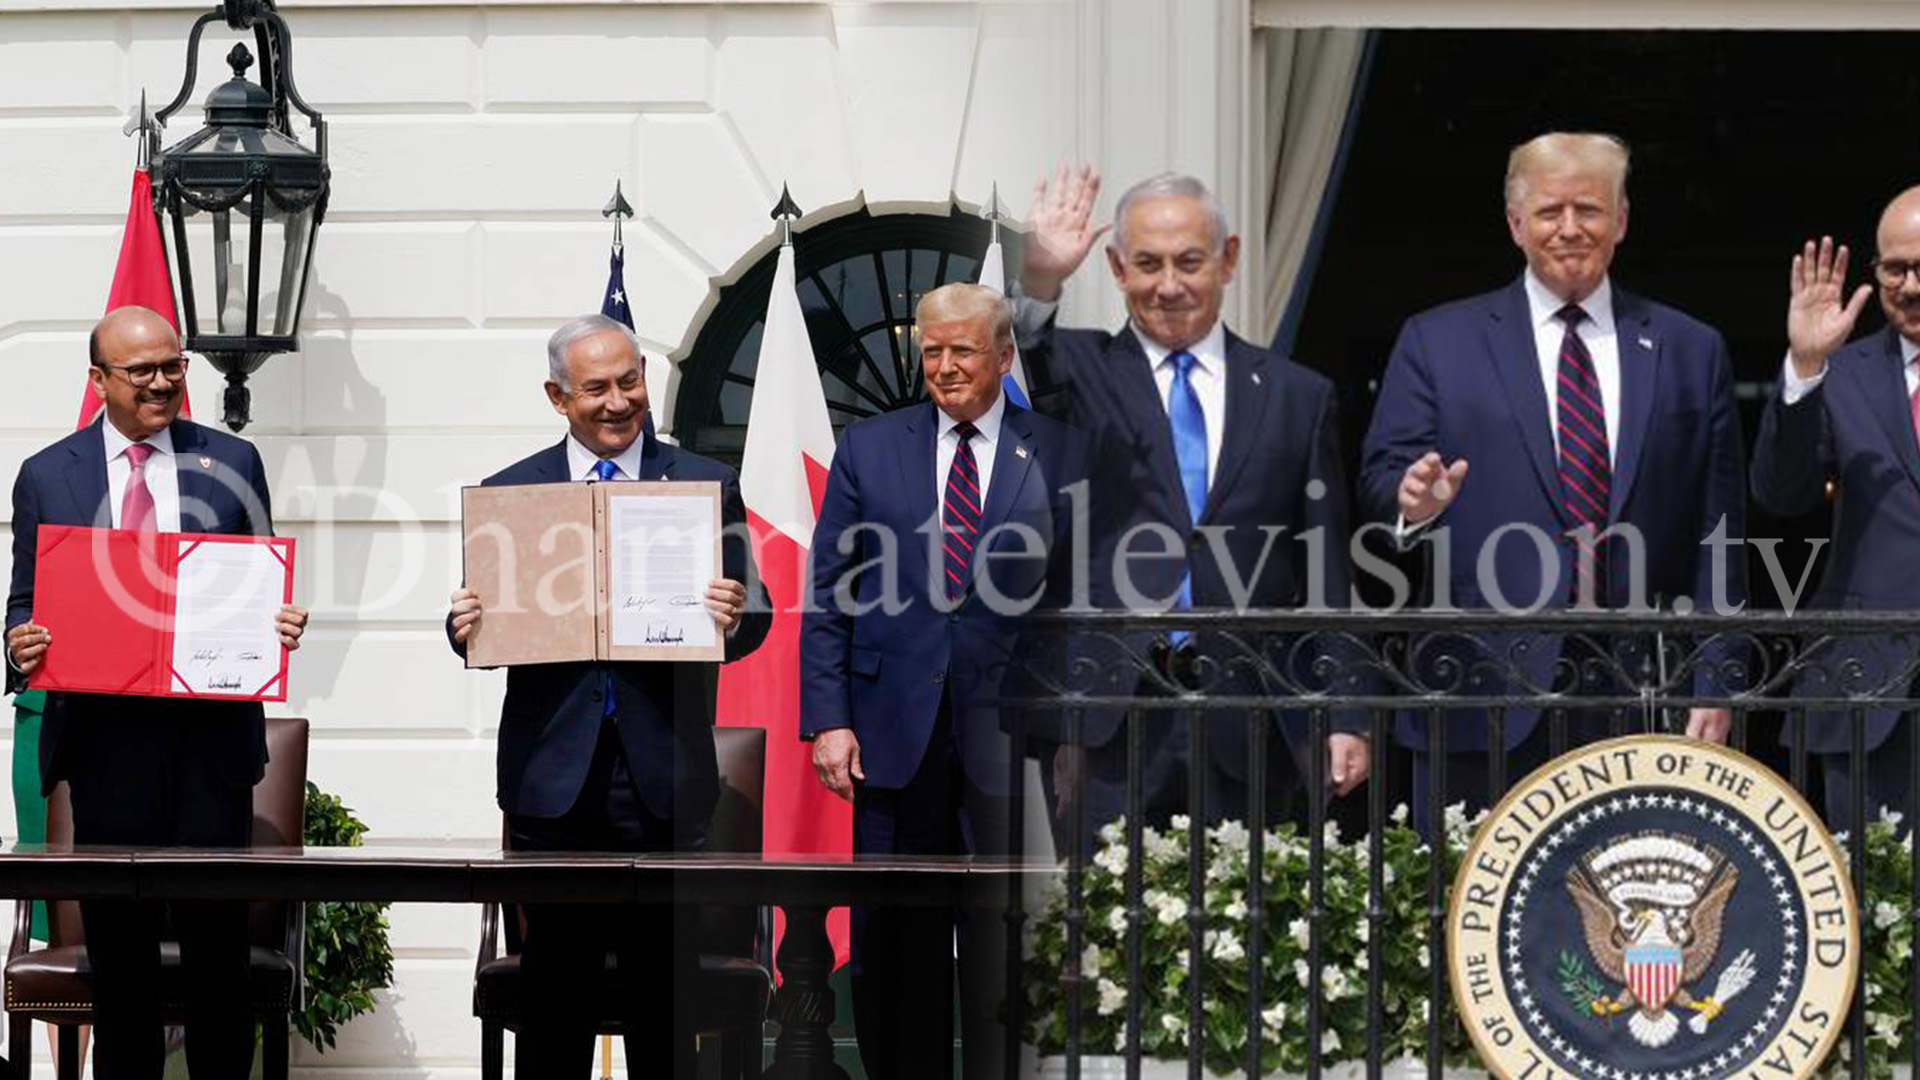 UAE, Bahrain and Israel sign historic accords at White House event